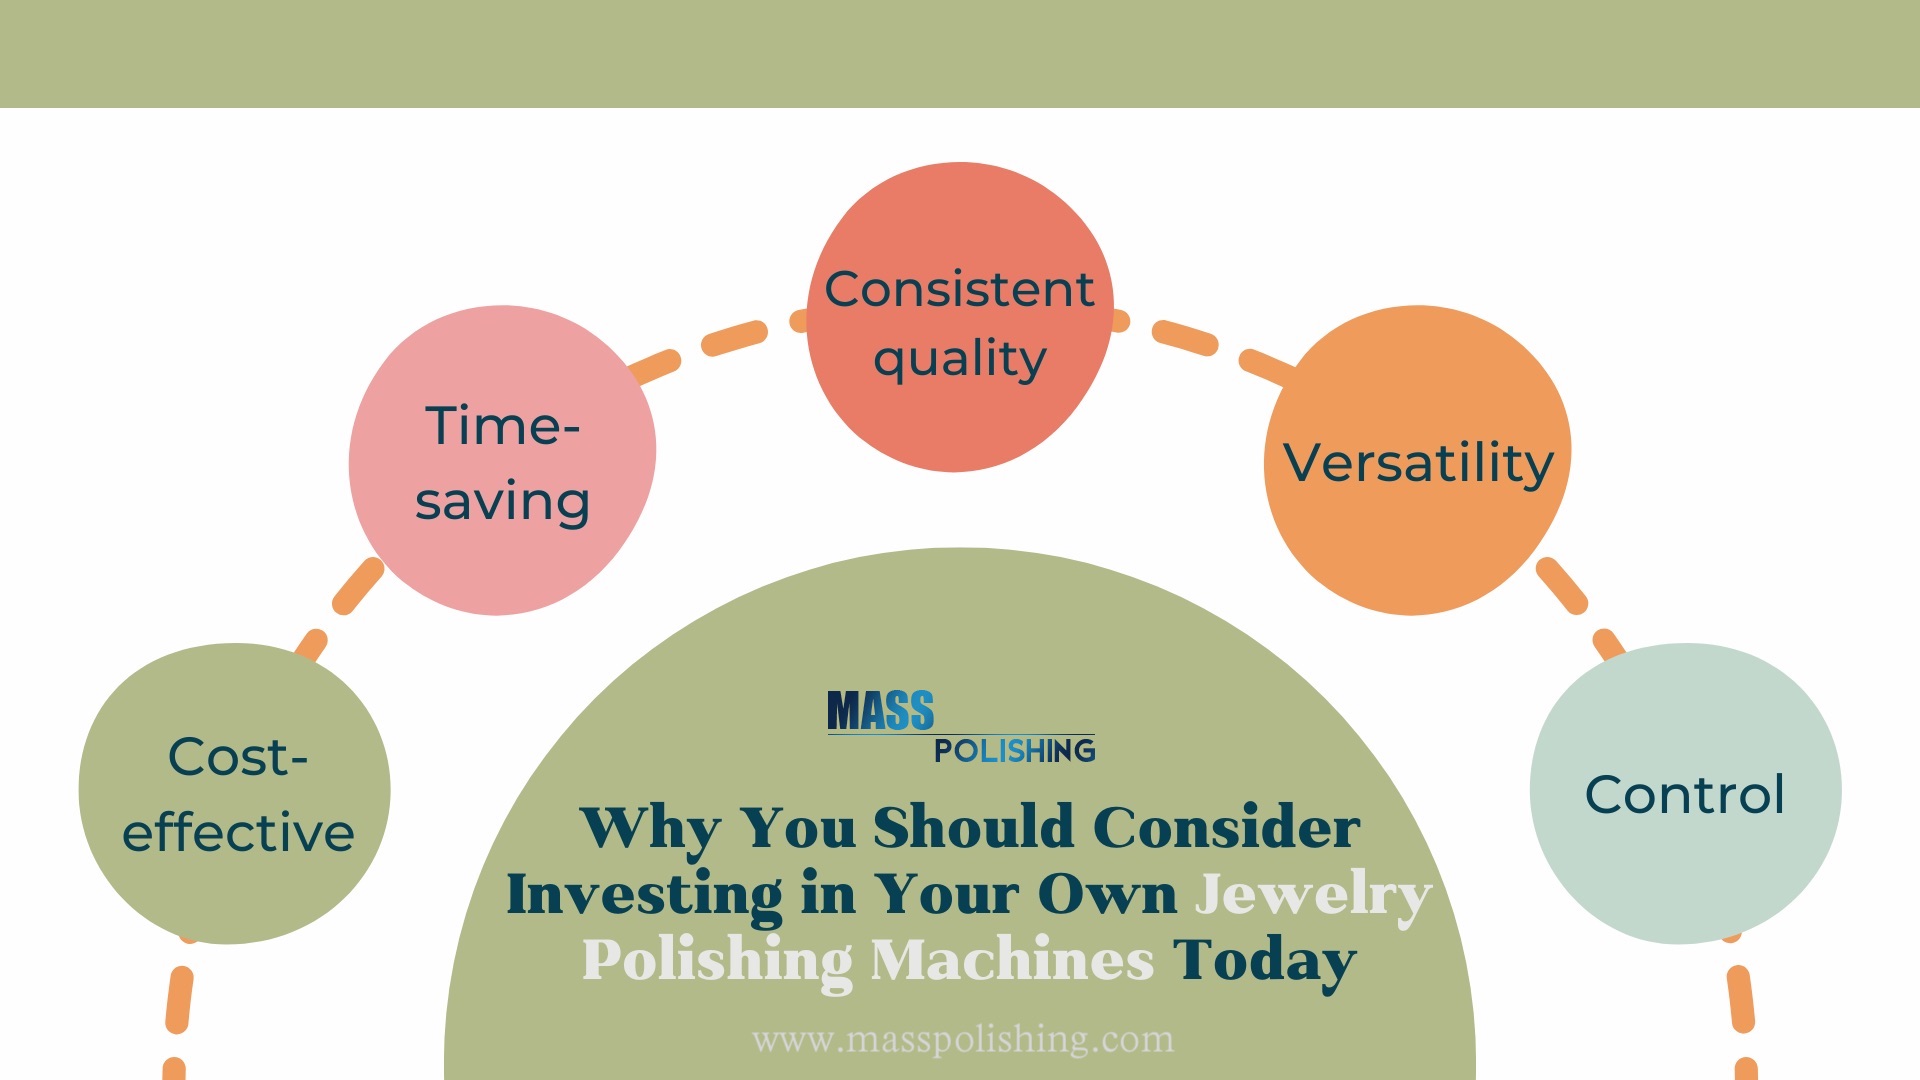 Why You Should Consider Investing in Your Own Jewelry Polishing Machines Today